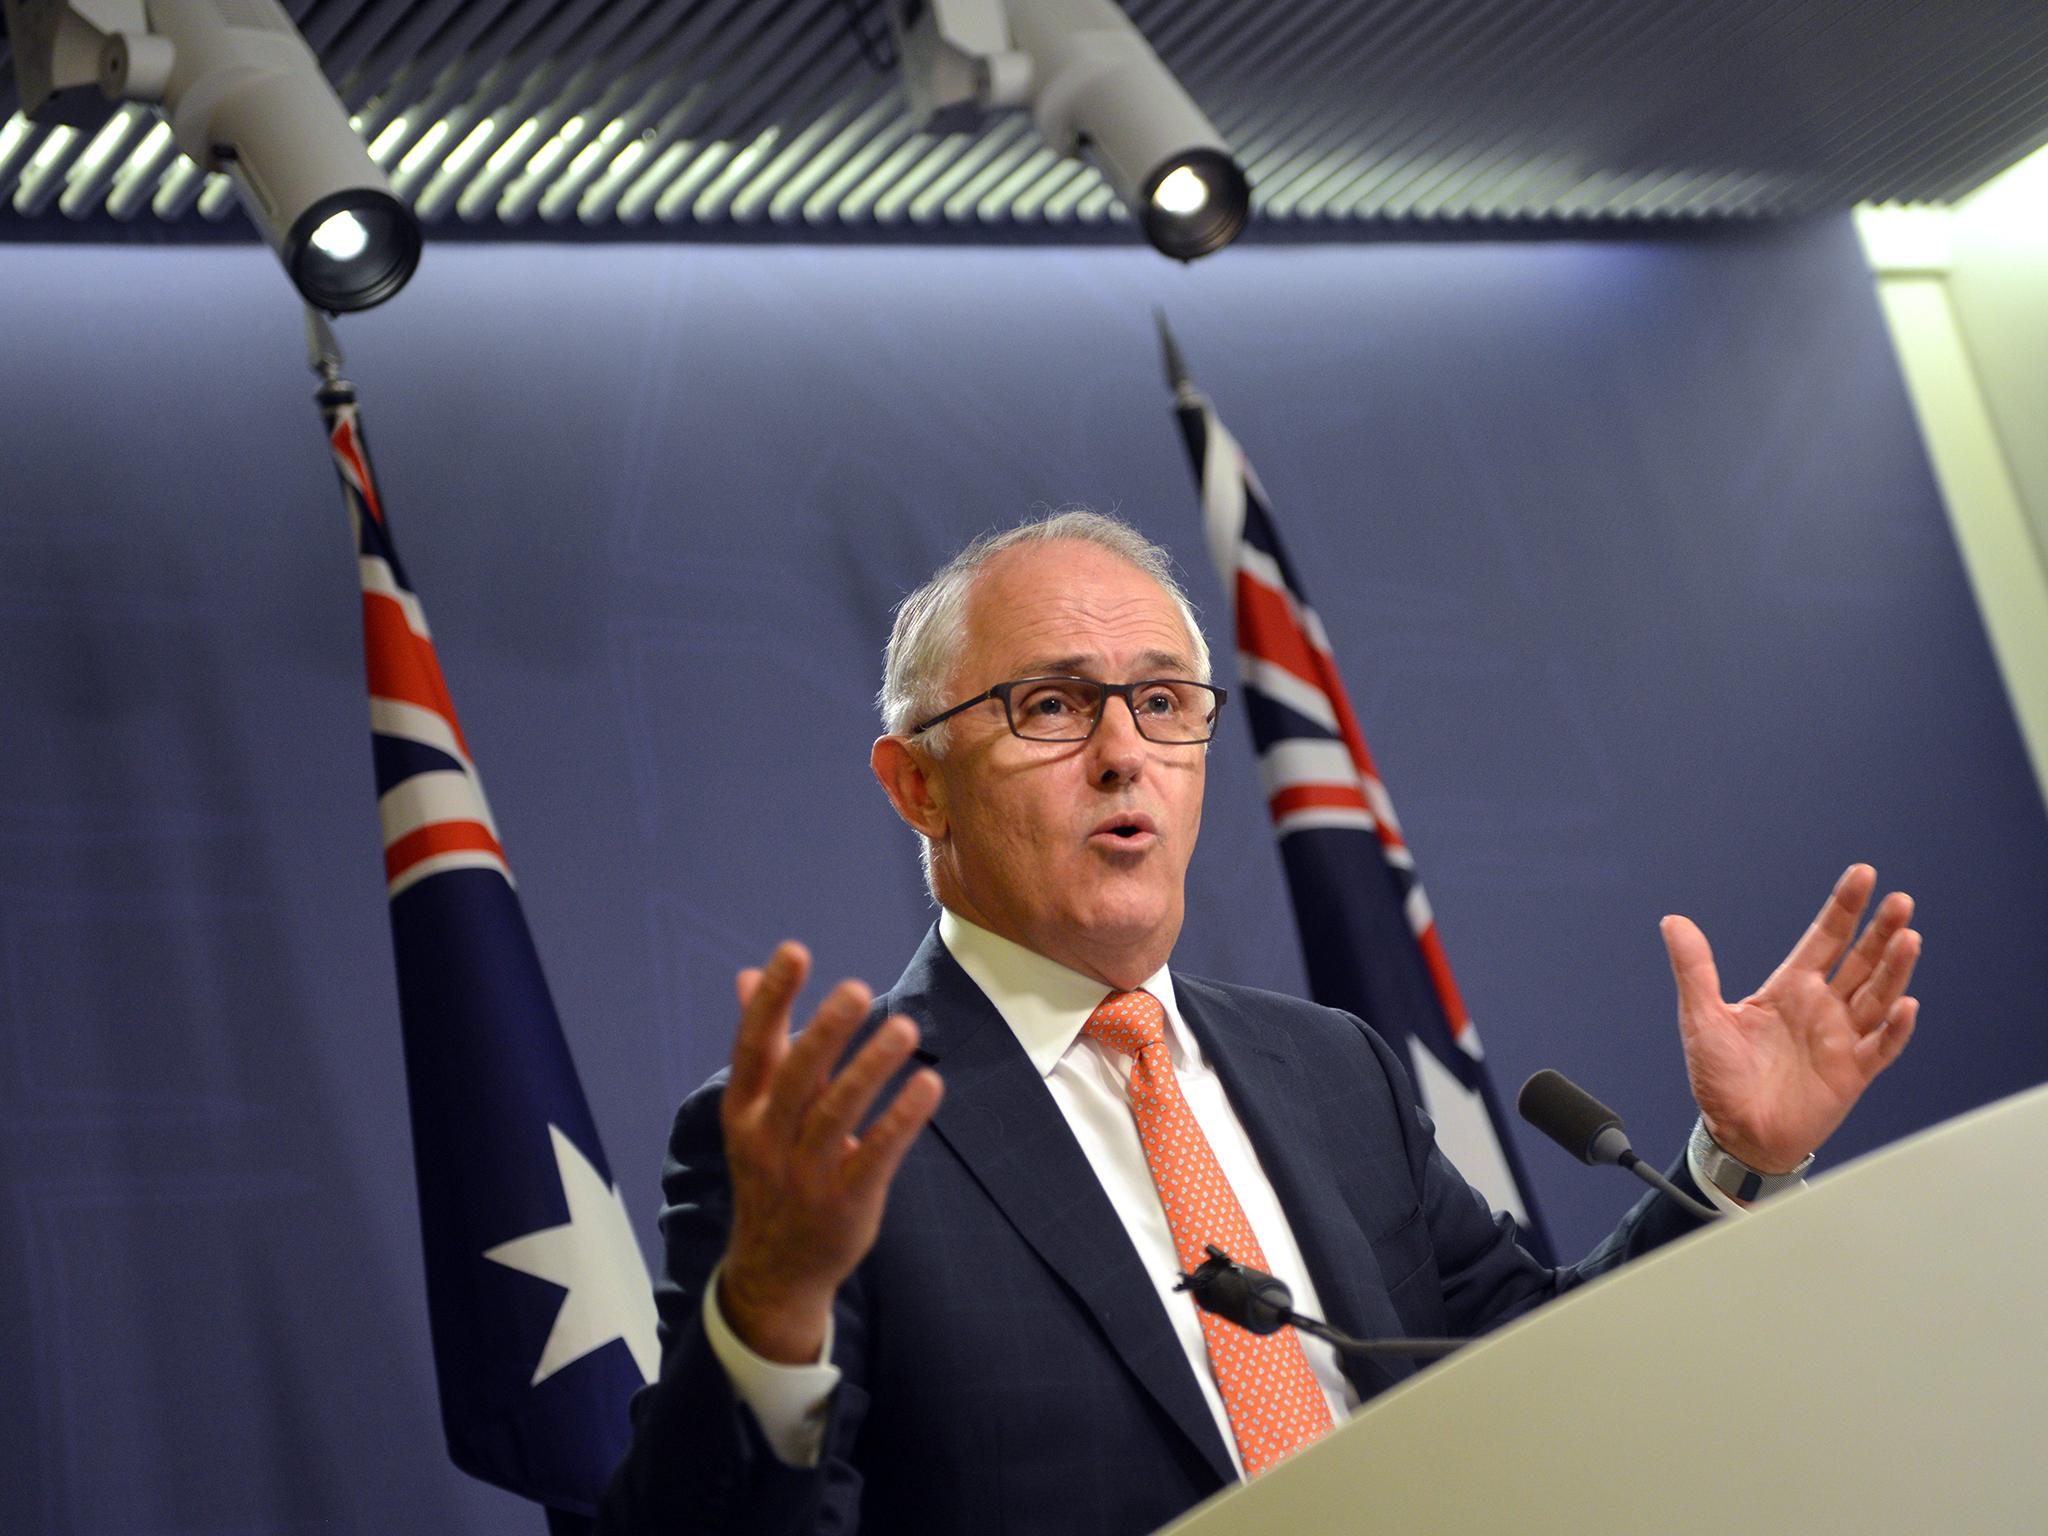 Malcom Turnbull wants a trade deal with the UK